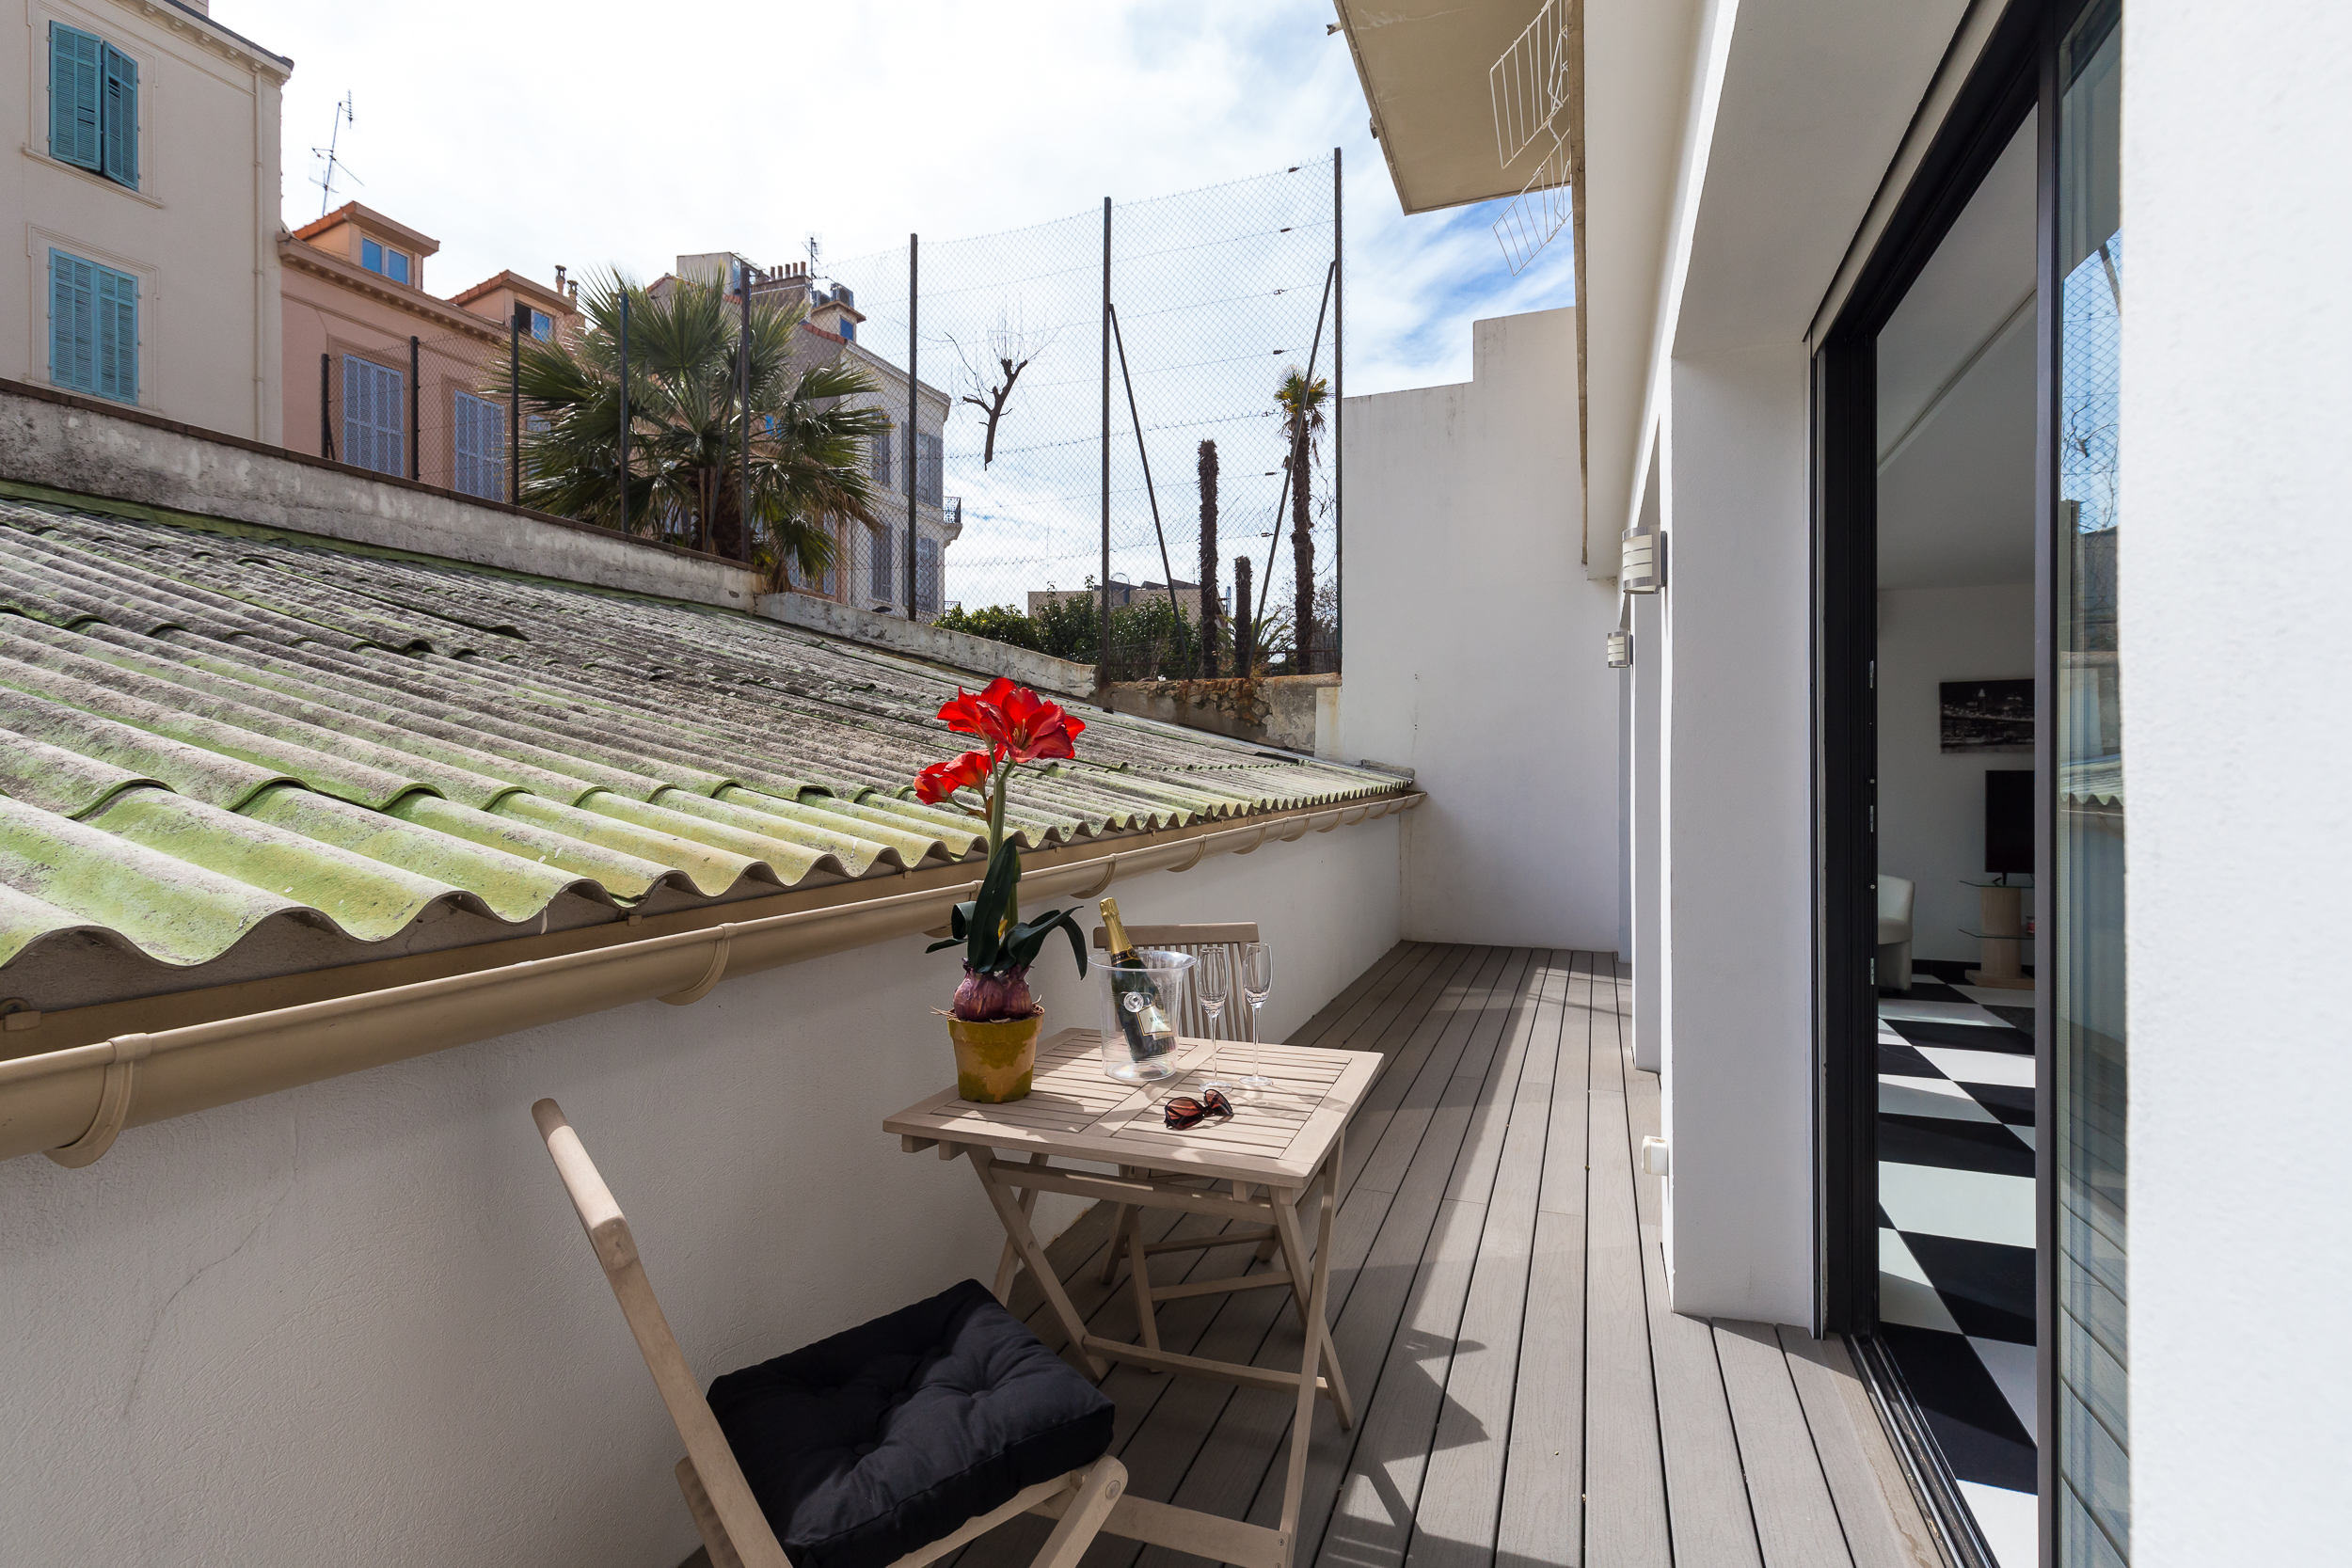 Modern 3 Bed apartment  in Cannes very close to the center and an easy pleasant walk to the Palais - 1745 4